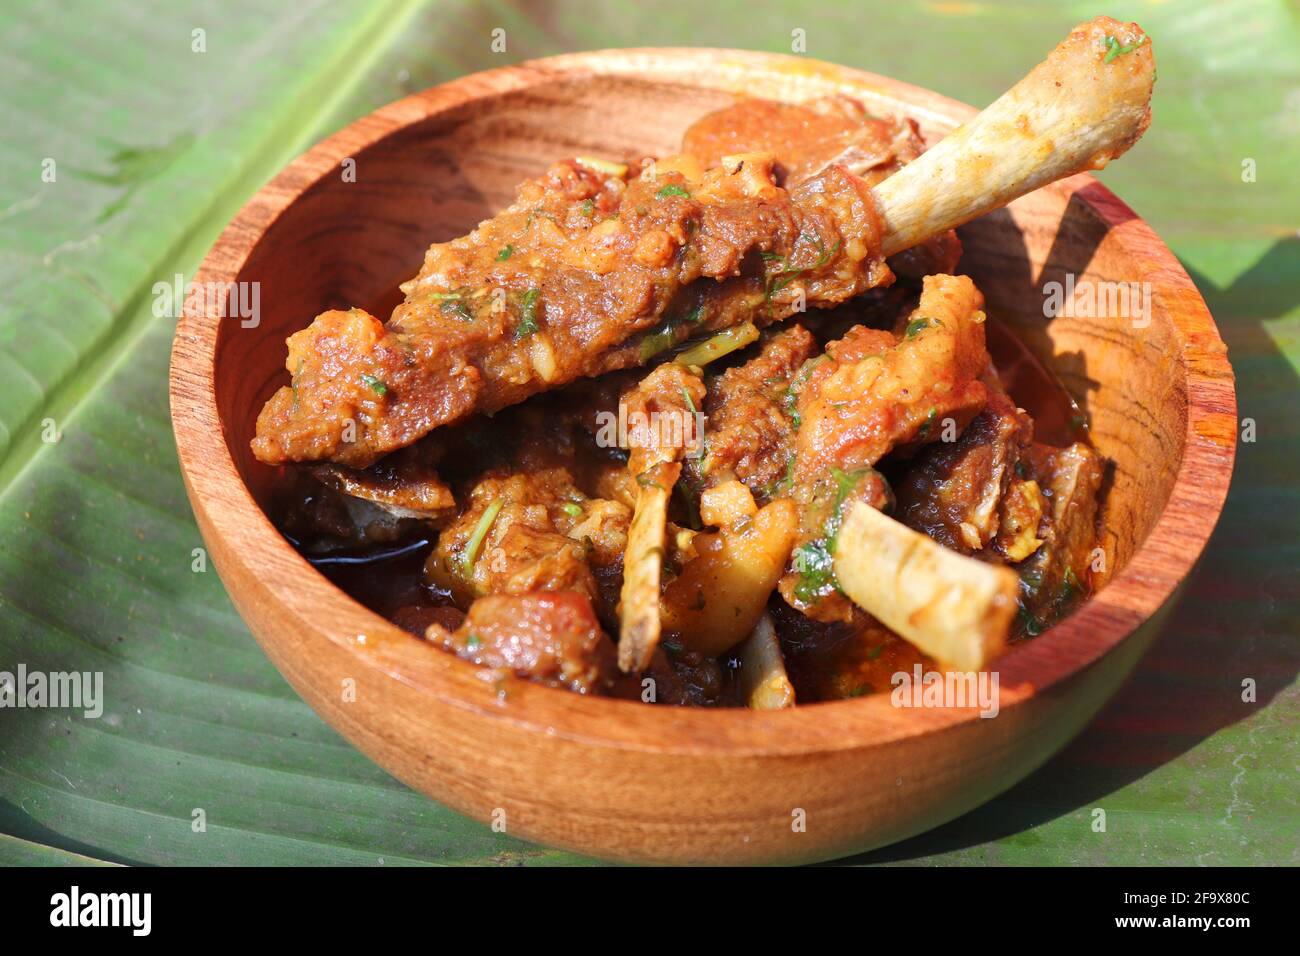 Mutton chops curry. Indian rustic spicy non-vegetarian goat meat curry. served in a wooden bowl over a Banana leaf background. copy space. Stock Photo